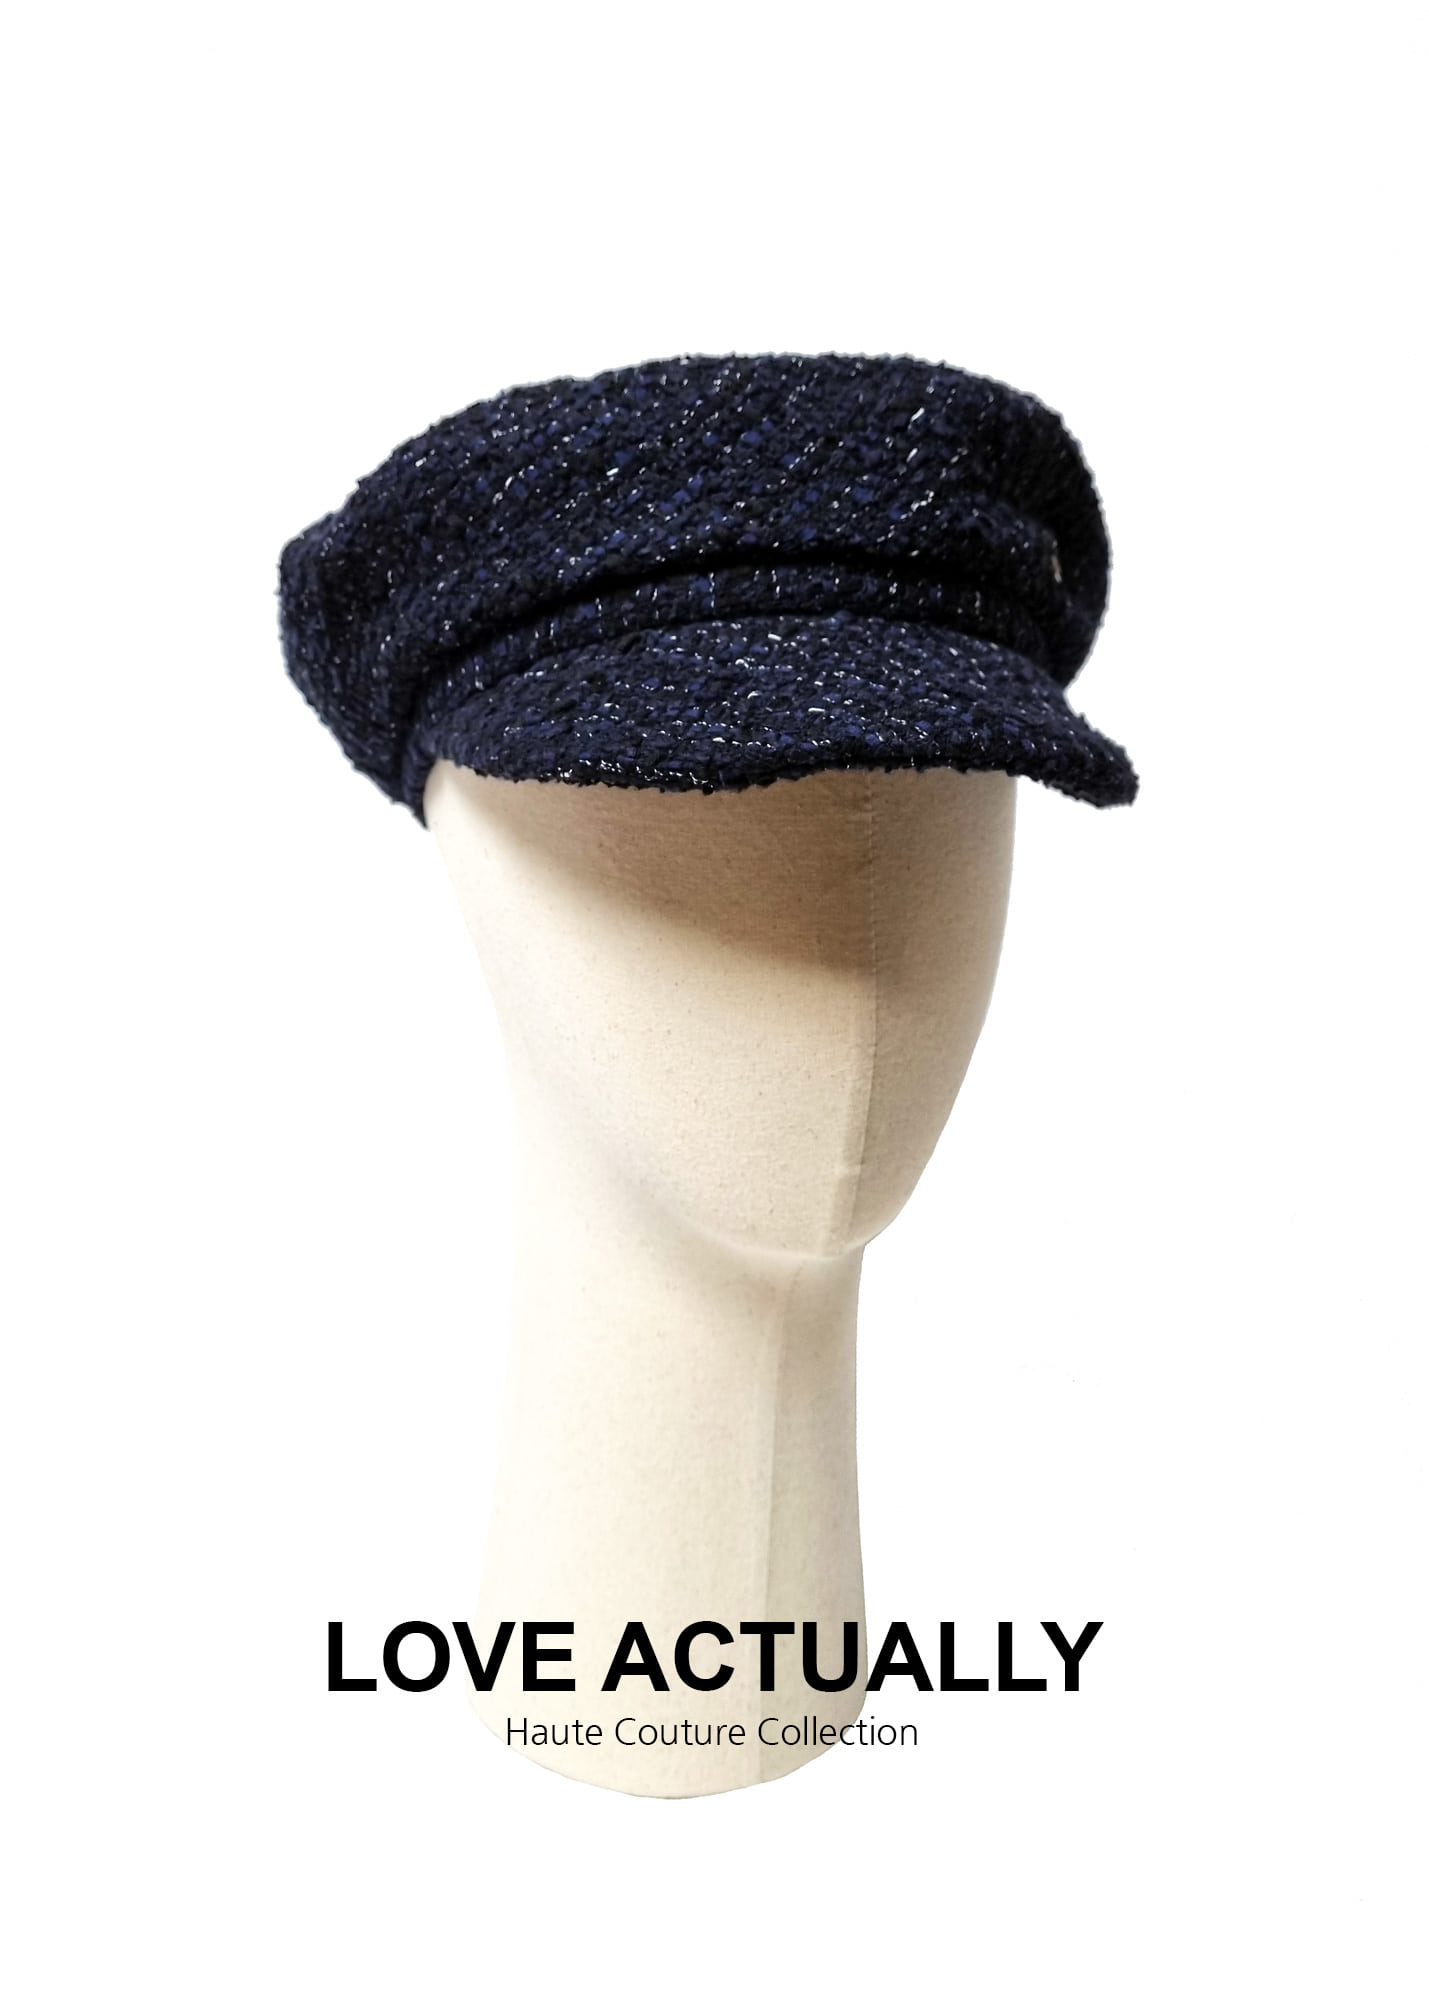 The Suits My Heart Haute Couture Newsboy Hat 내마음 오뜨꾸띄르 뉴스보이모자